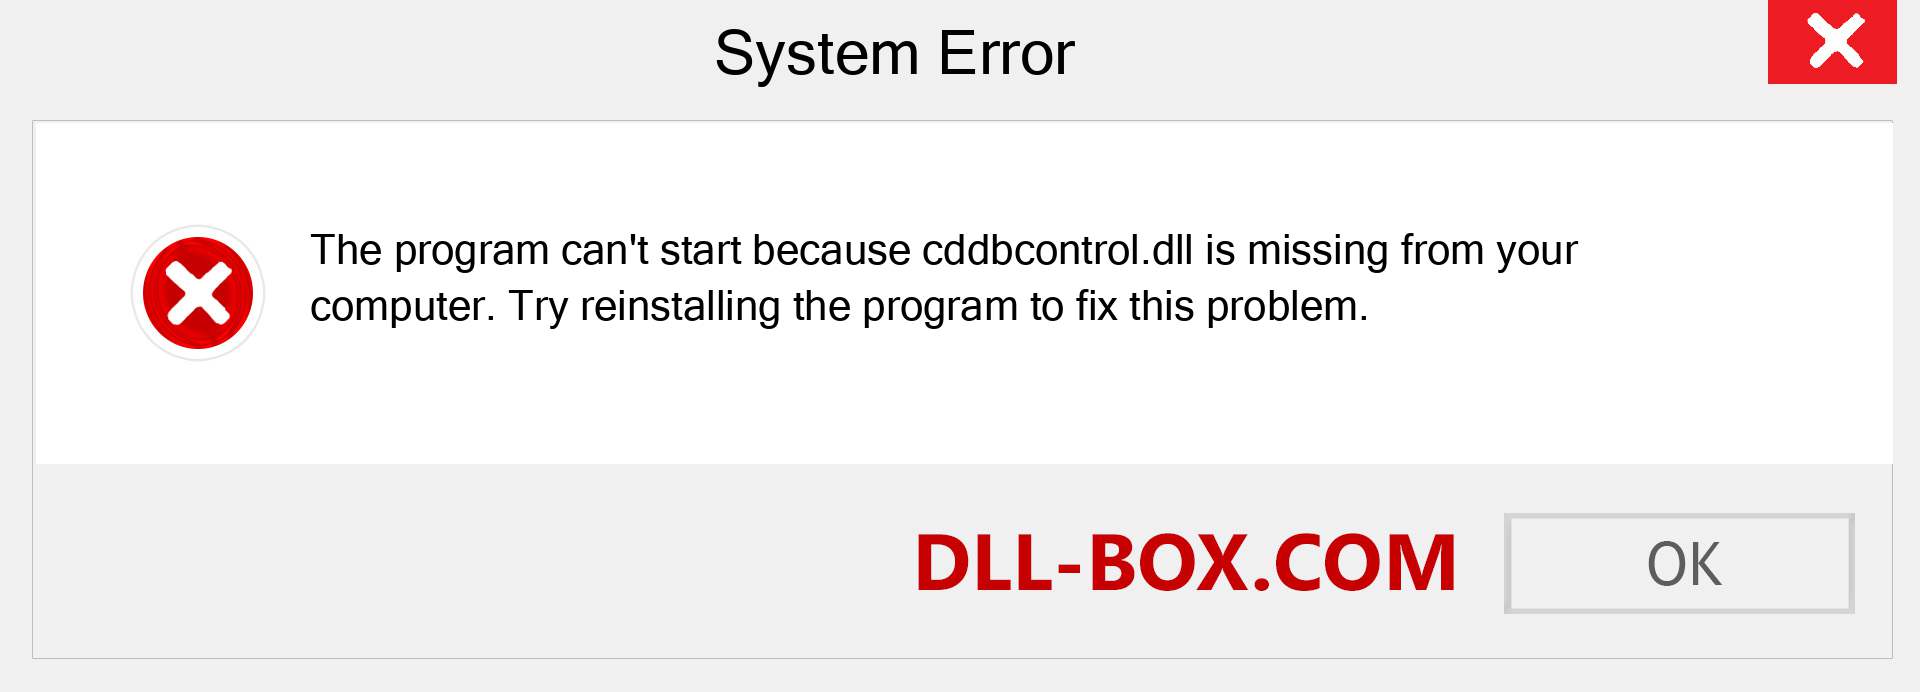  cddbcontrol.dll file is missing?. Download for Windows 7, 8, 10 - Fix  cddbcontrol dll Missing Error on Windows, photos, images